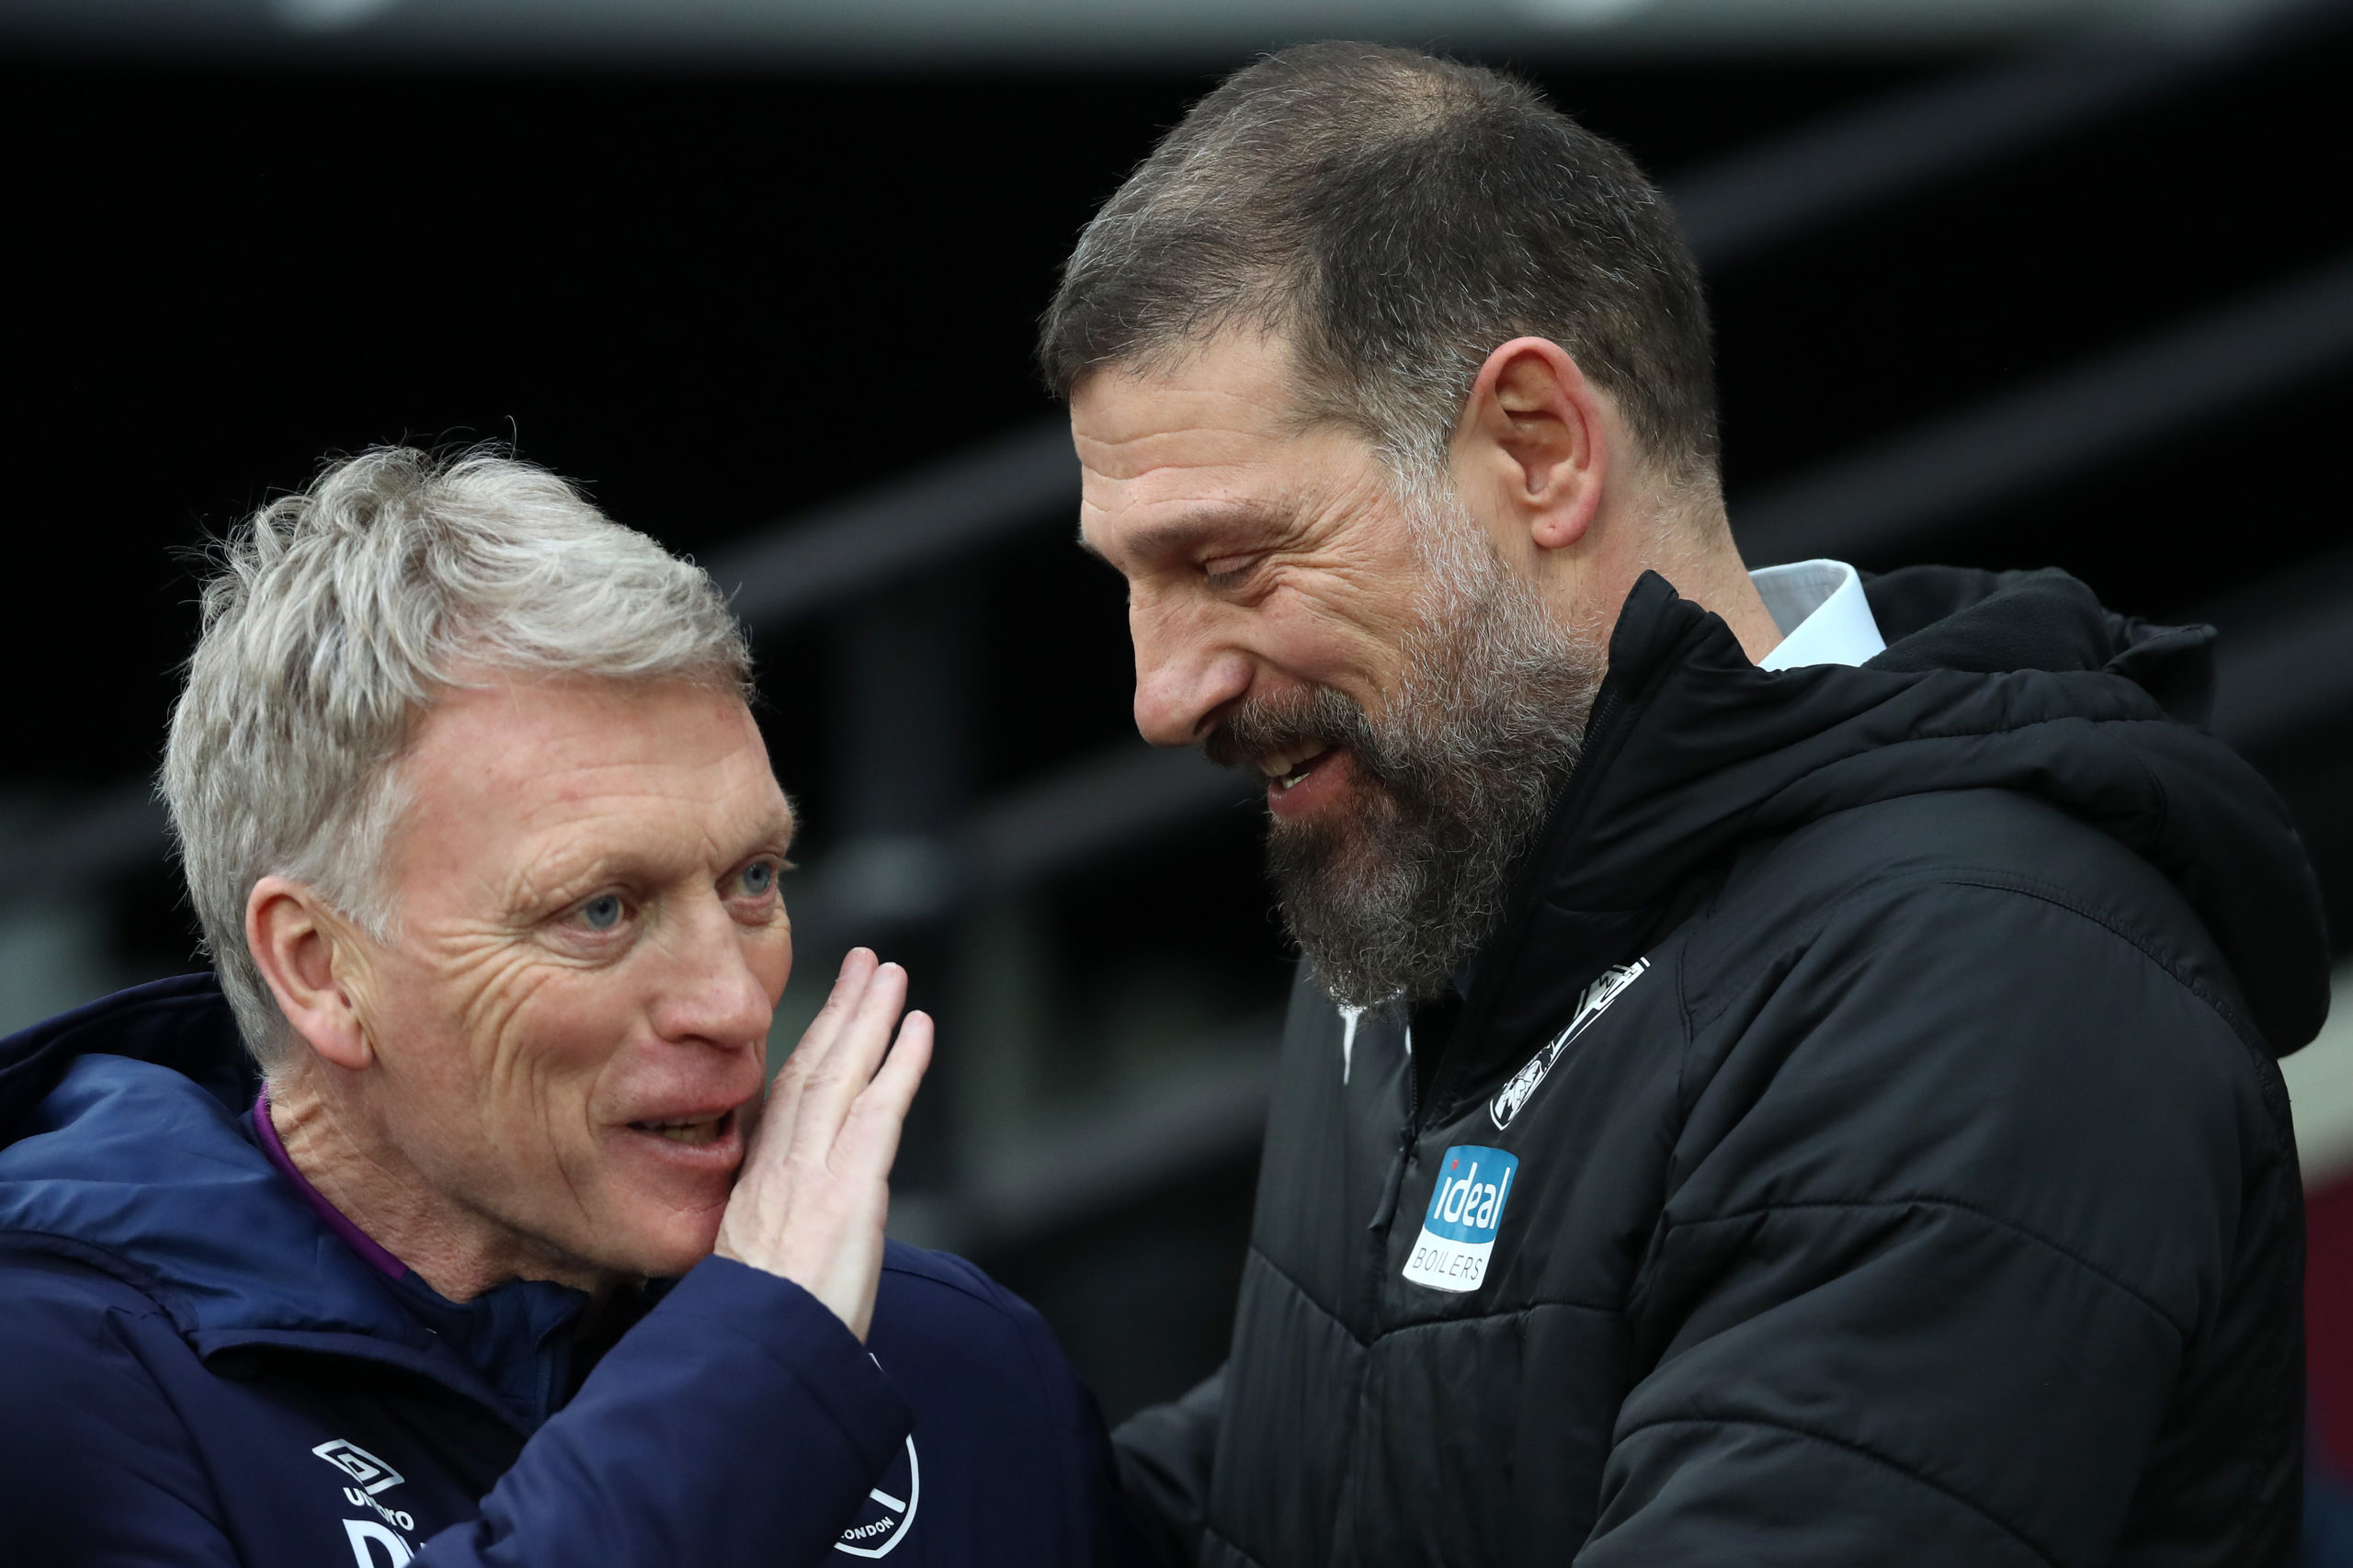 Slaven Bilic warns David Moyes if you don't ask you don't get with West Ham's owners ahead of summer rebuild